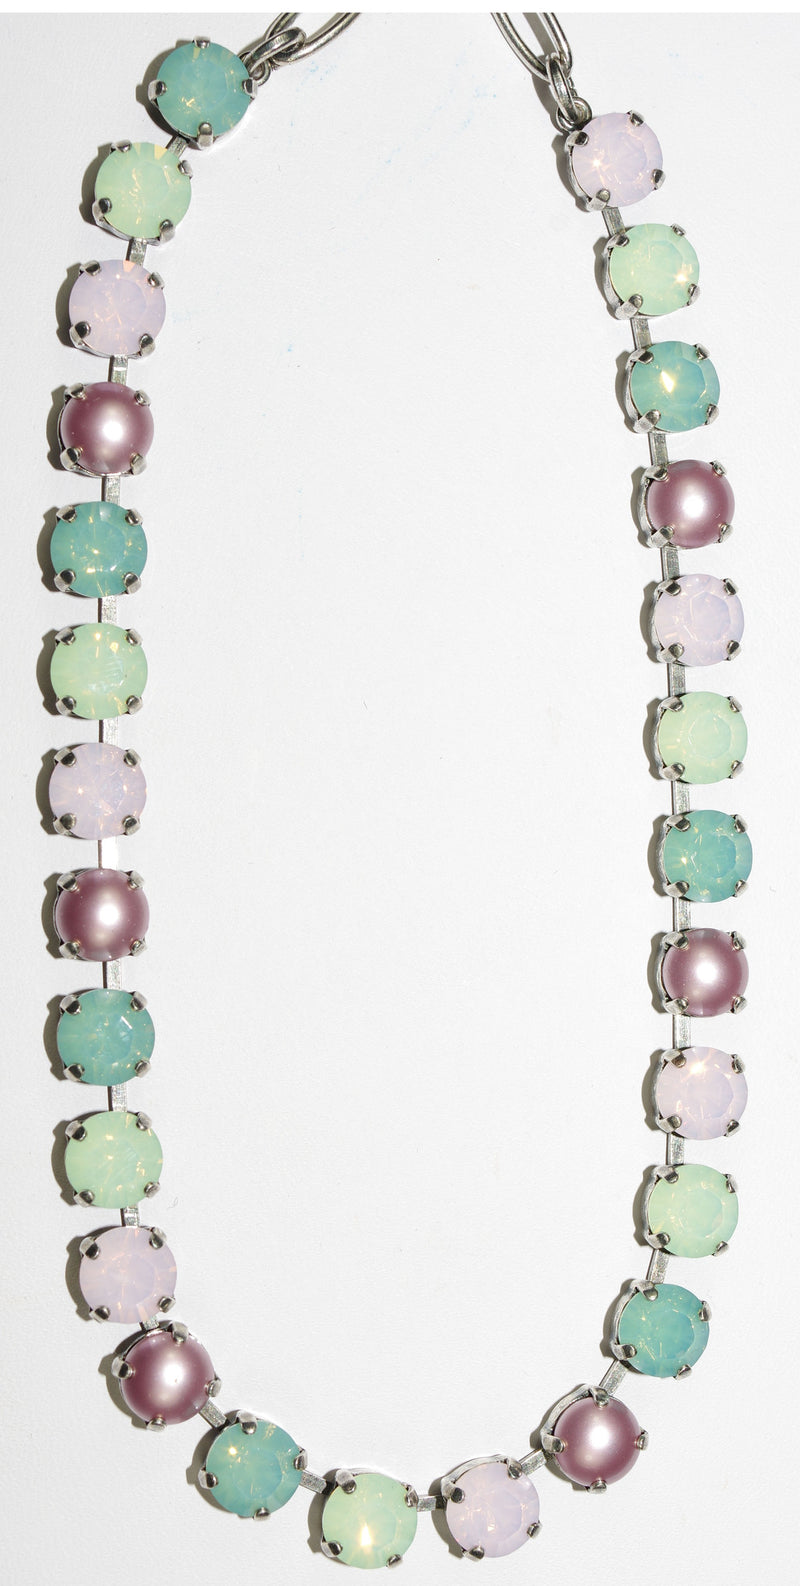 MARIANA NECKLACE BETTE MORNING GLORY: pink, green, pearl, pacific opal stones in silver setting, 16" adjustable chain